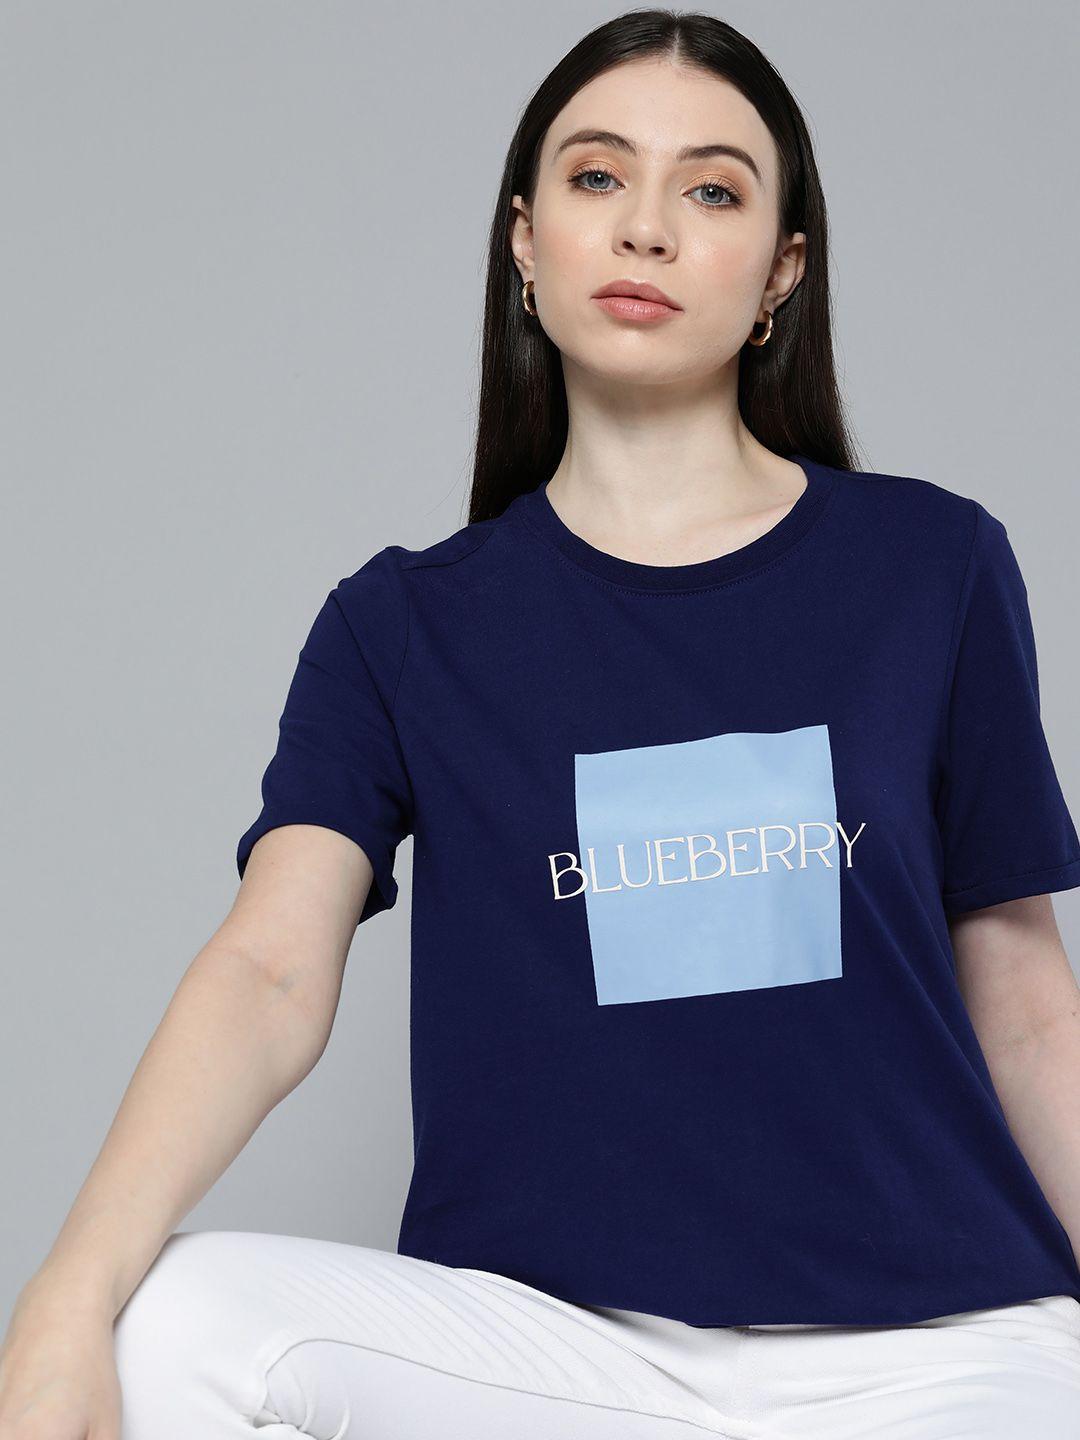 chemistry printed pure cotton t-shirt